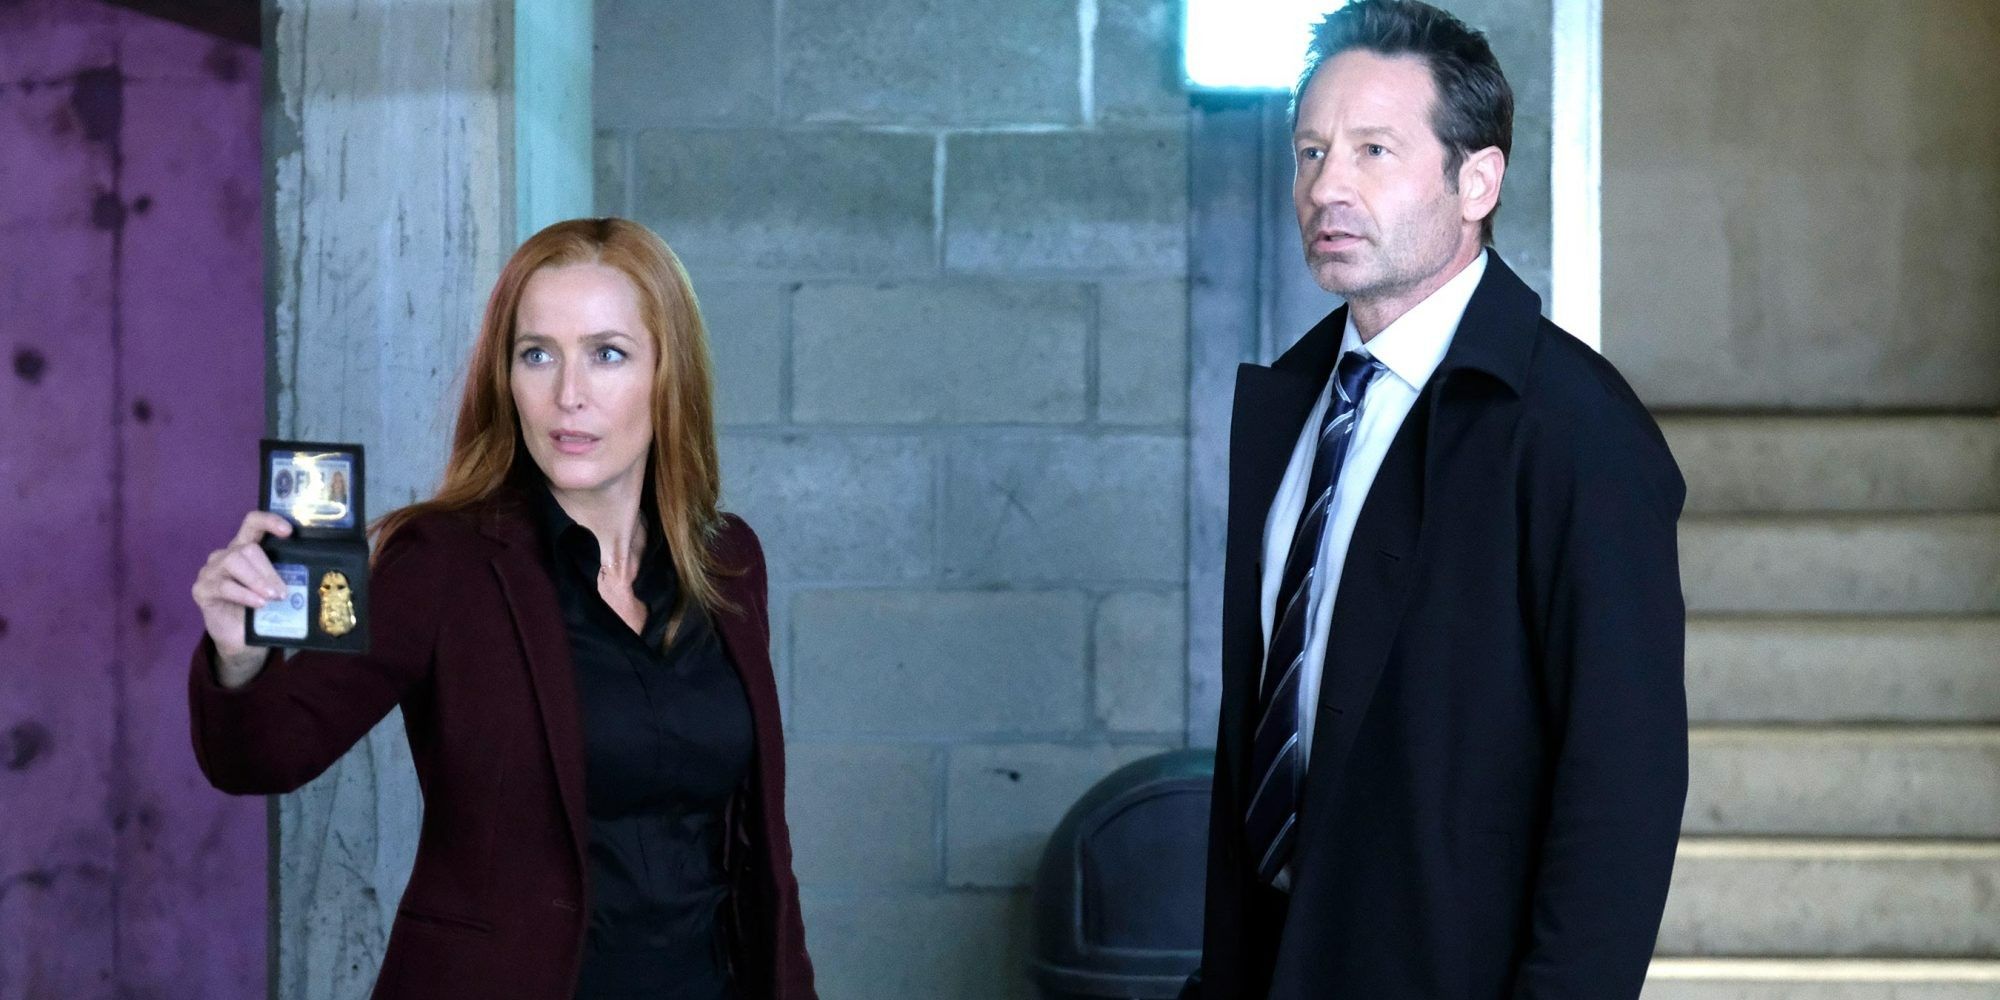 Scully showing her badge while Mulder looks in the X-Files